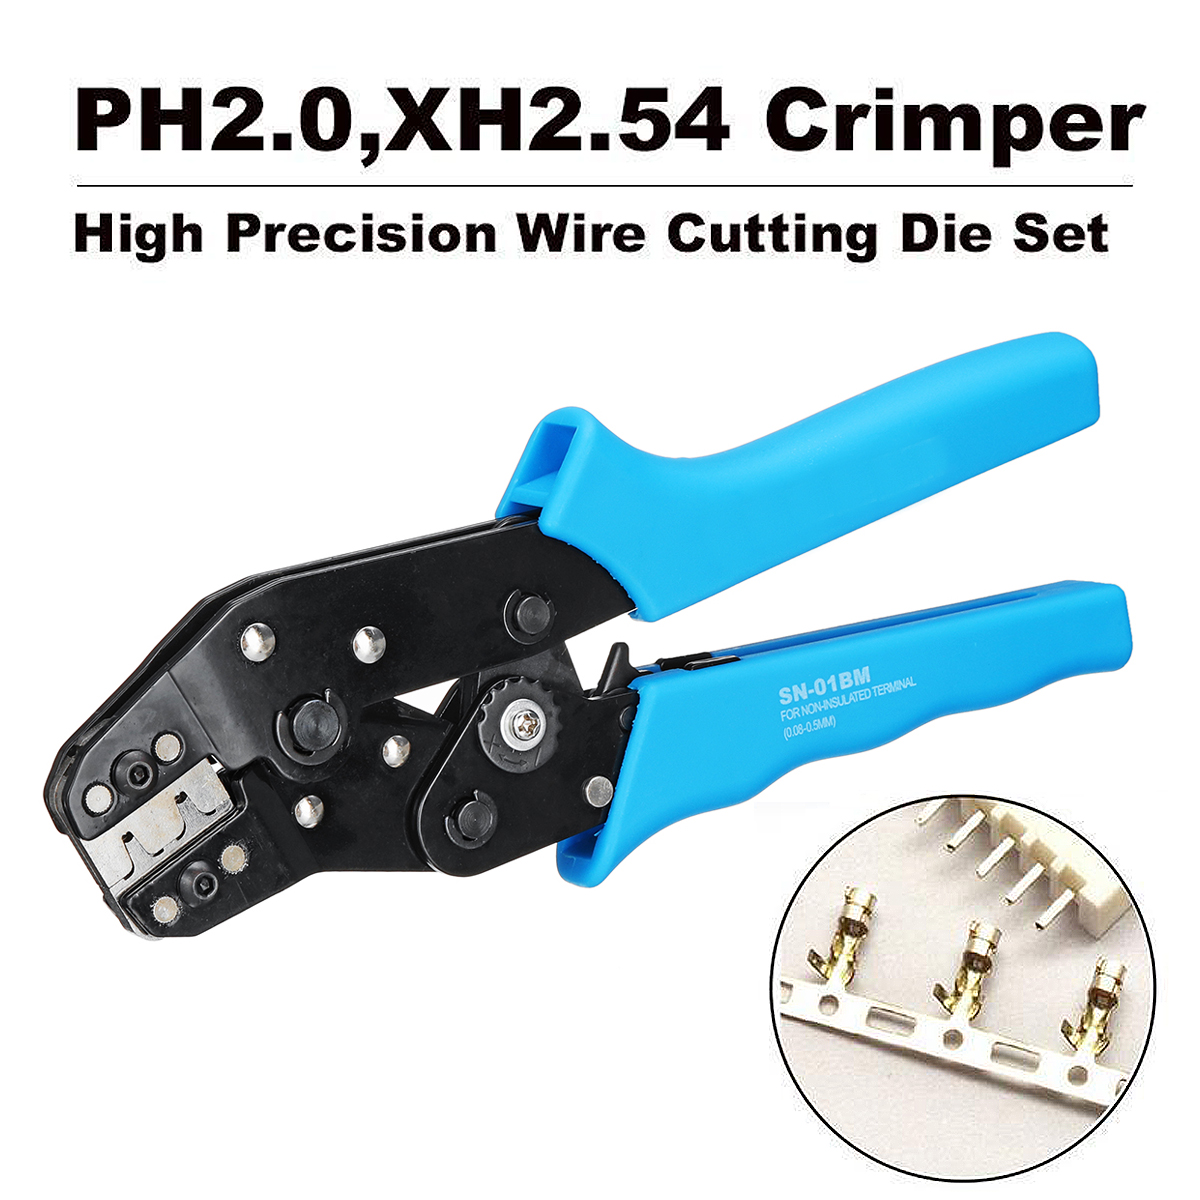 SN-01BM AWG28-20 Self-adjusting Terminal Wire Cable Crimping Pliers Tool for Dupont PH2.0 XH2.54 KF2510 JST Molex D-SUB Terminal 40